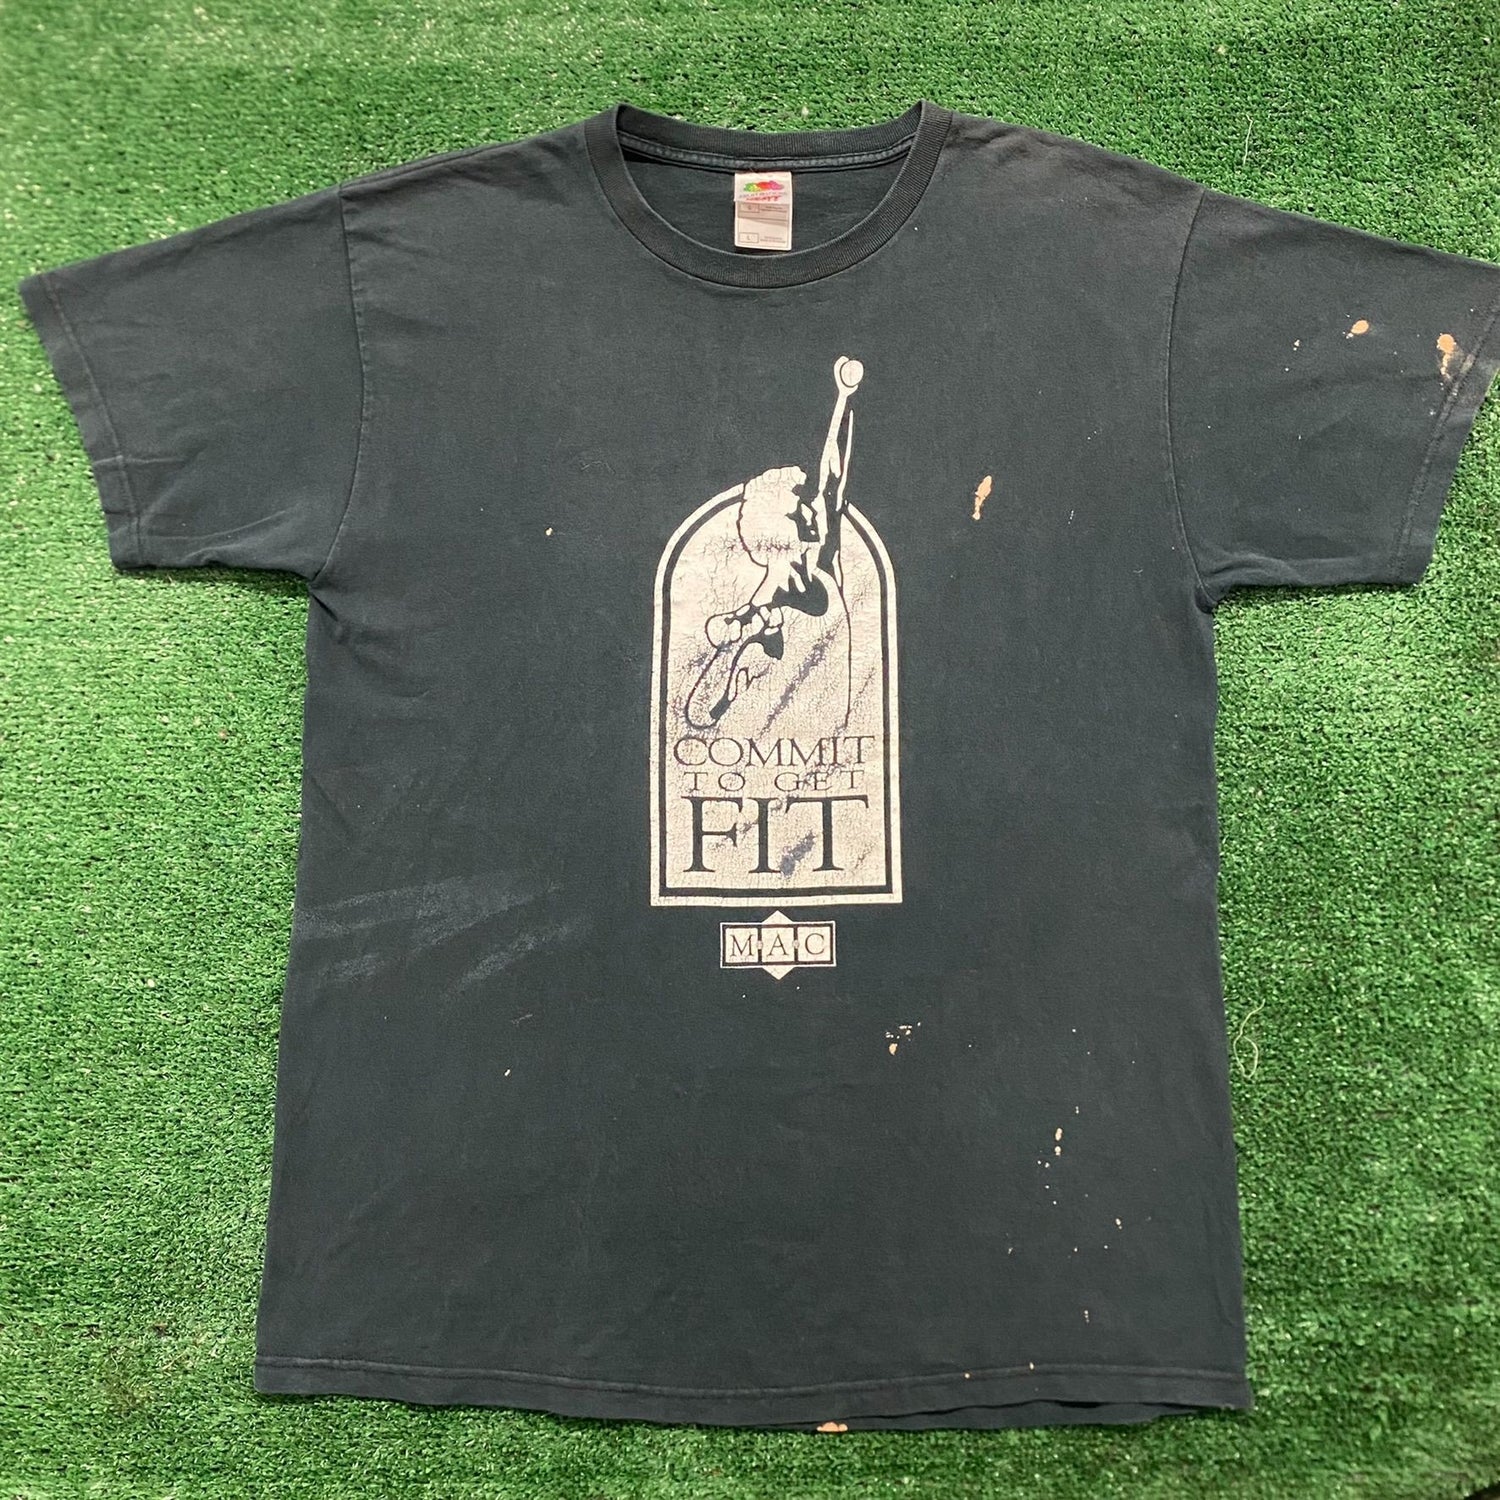 All Tees - Vintage and Retro T-Shirts